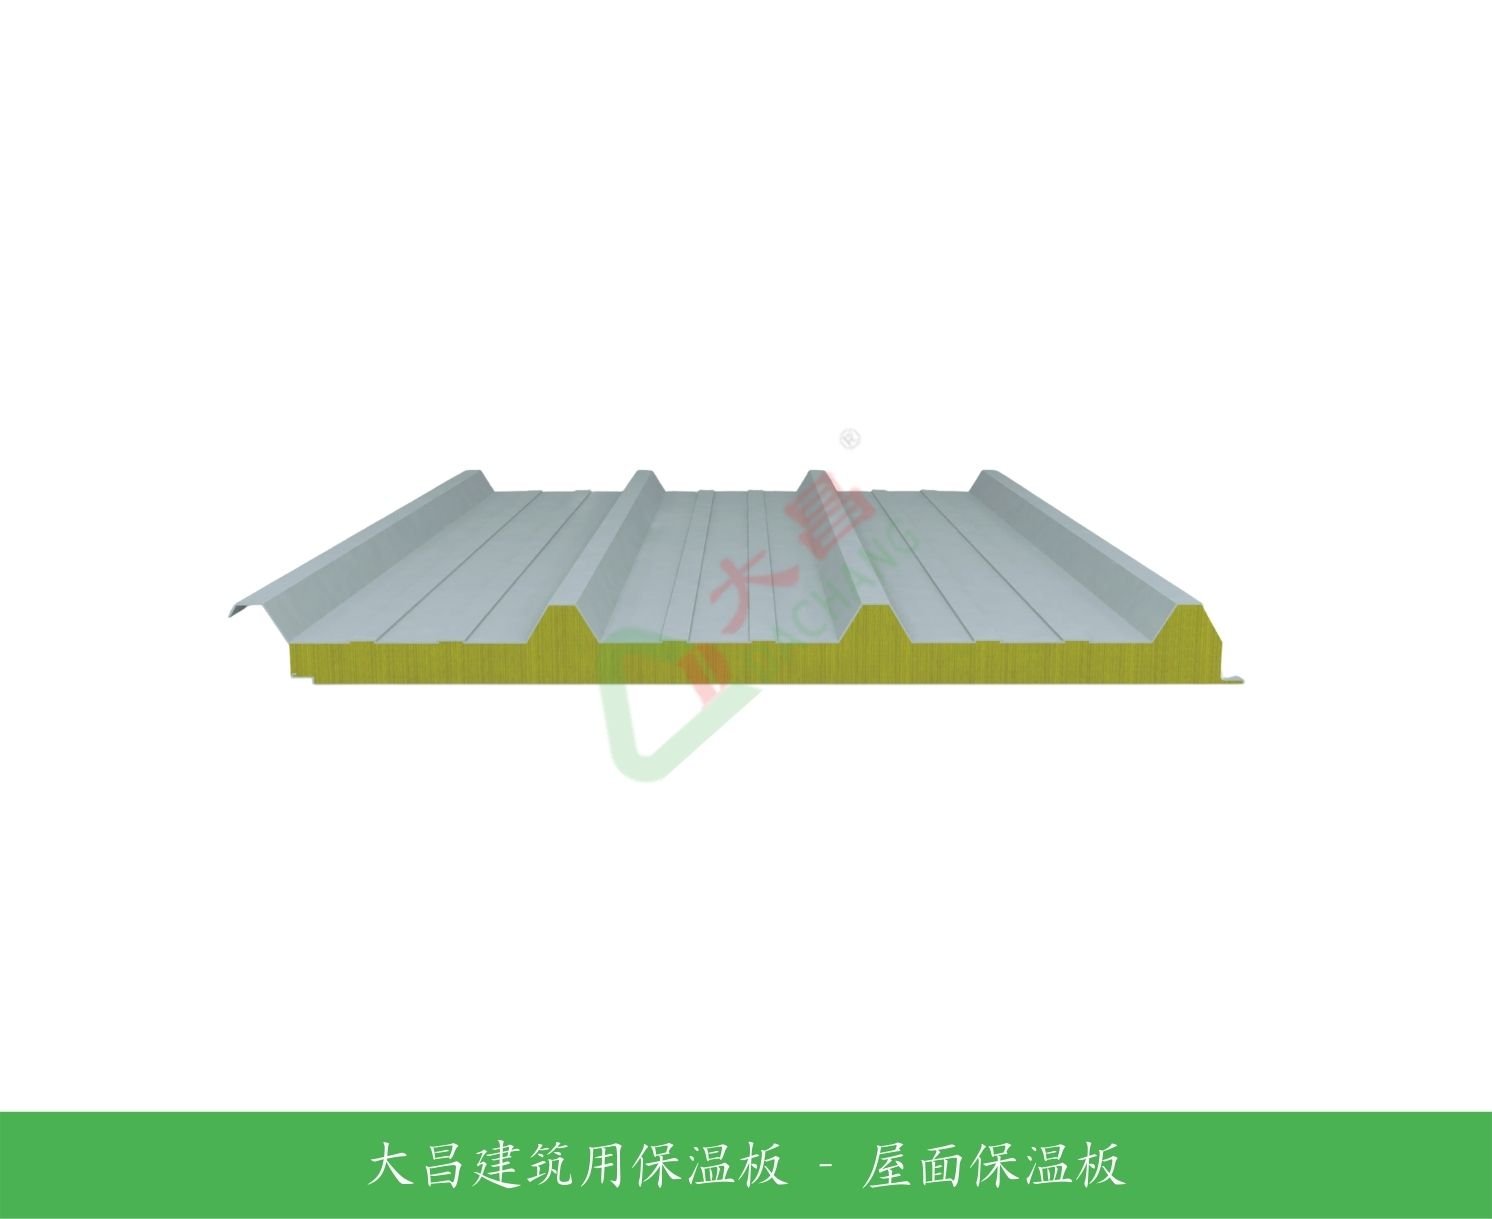 200mm Insulated Roof Sandwich Panels